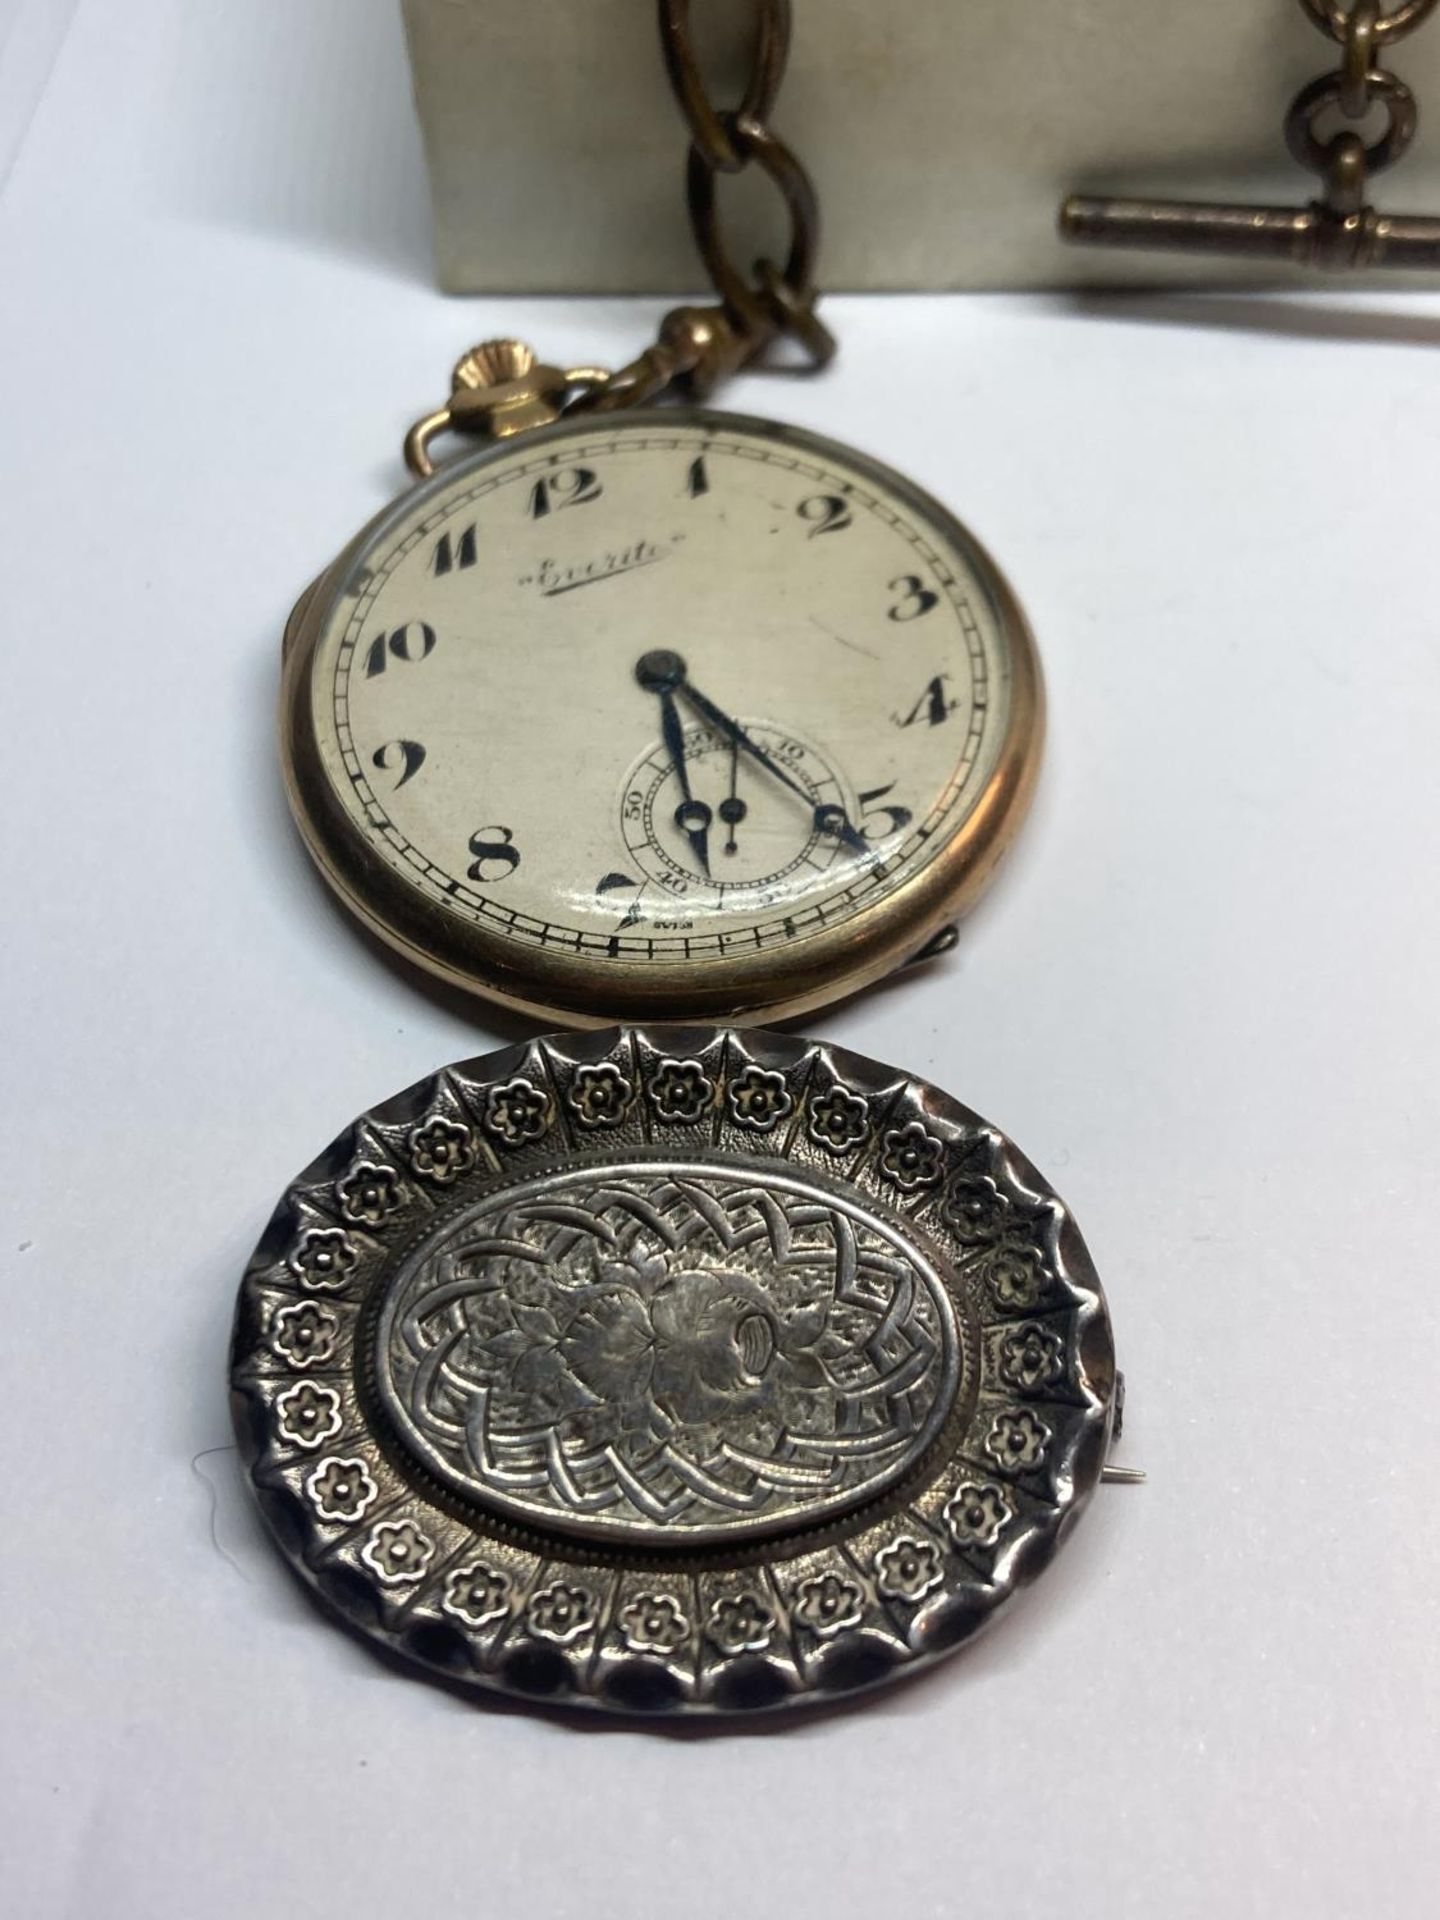 VARIOUS ITEMS TO INCLUDE A GOLD PLATED POCKET WATCH WITH CHAIN, A WHITE METAL POSSIBLY SILVER BROOCH - Image 3 of 6